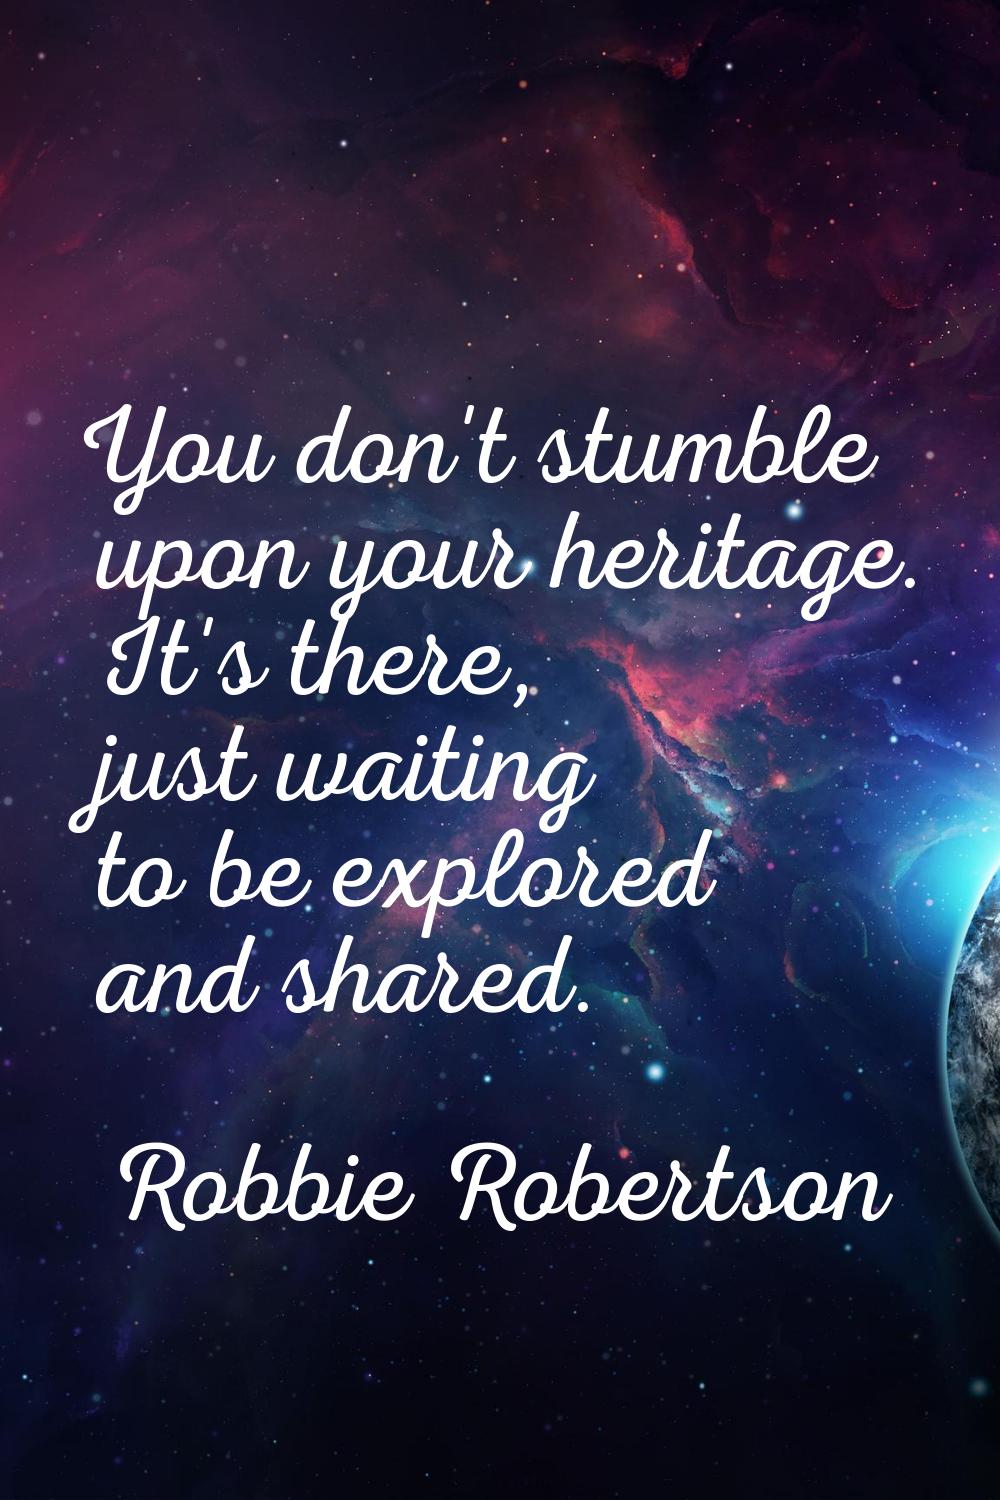 You don't stumble upon your heritage. It's there, just waiting to be explored and shared.